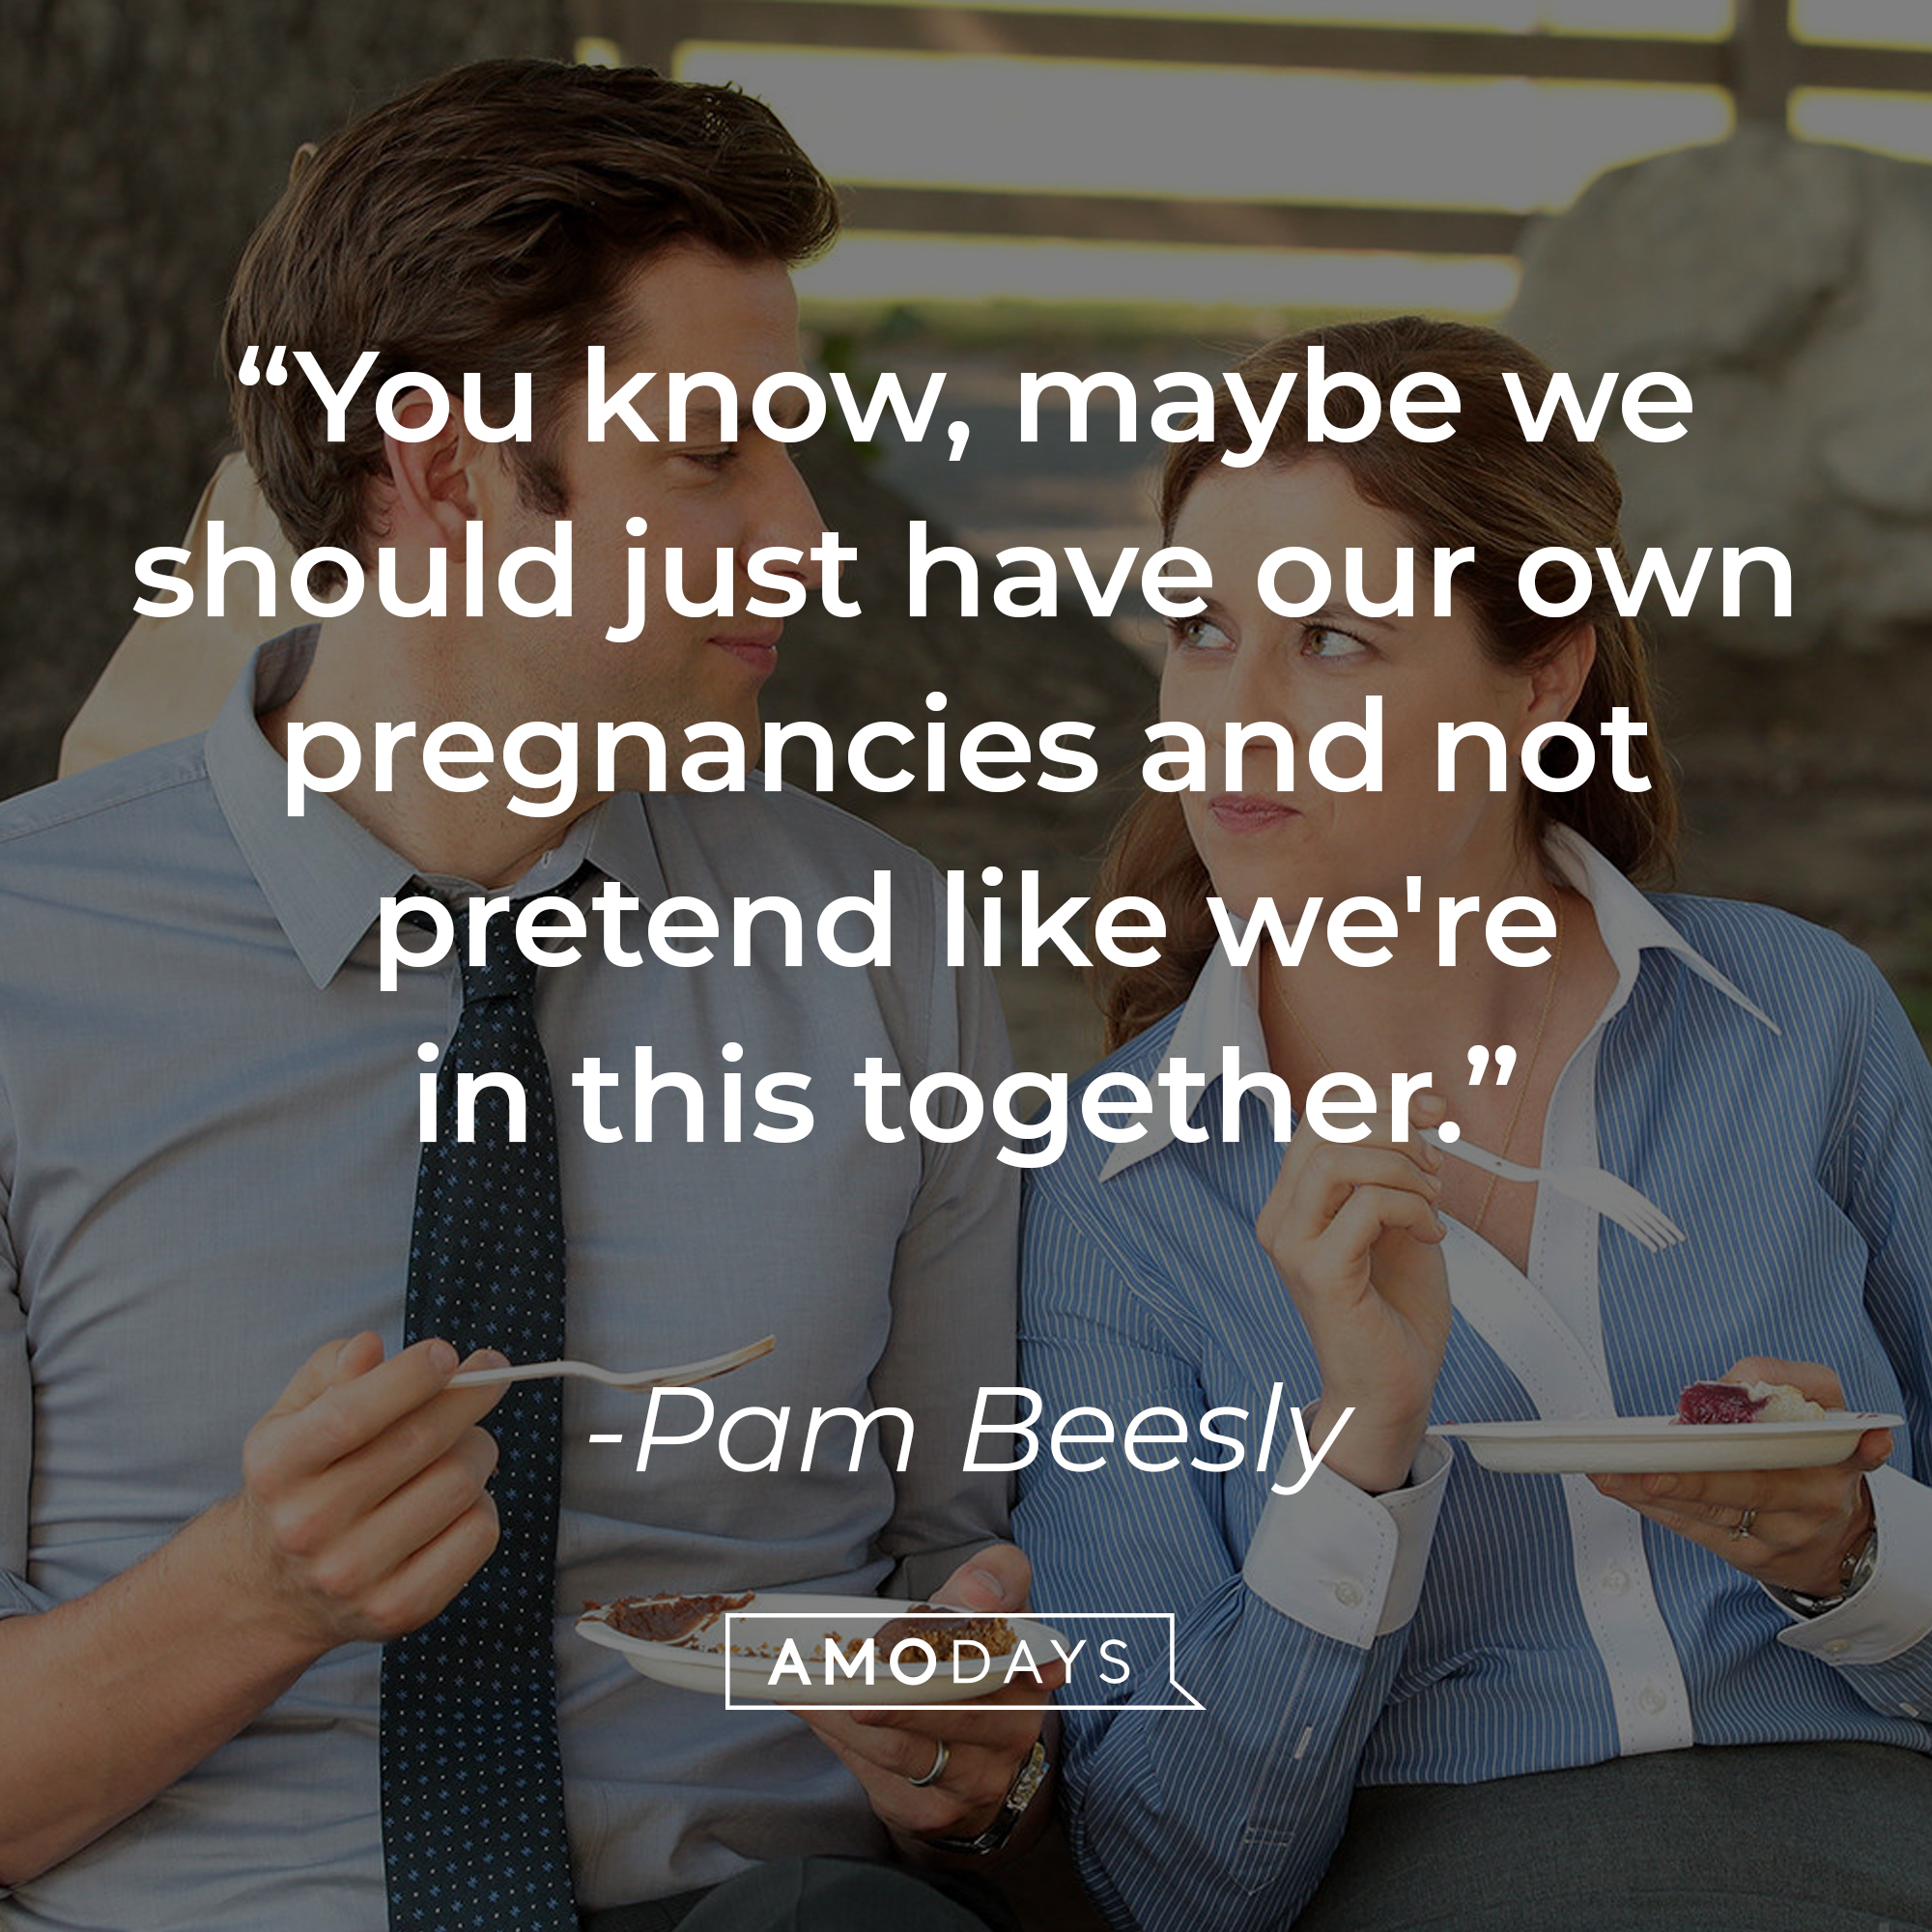 Pam Beesly's quote, "You know, maybe we should have our own pregnancies and not pretend like we're in this together." | Source: Facebook/TheOfficeTV